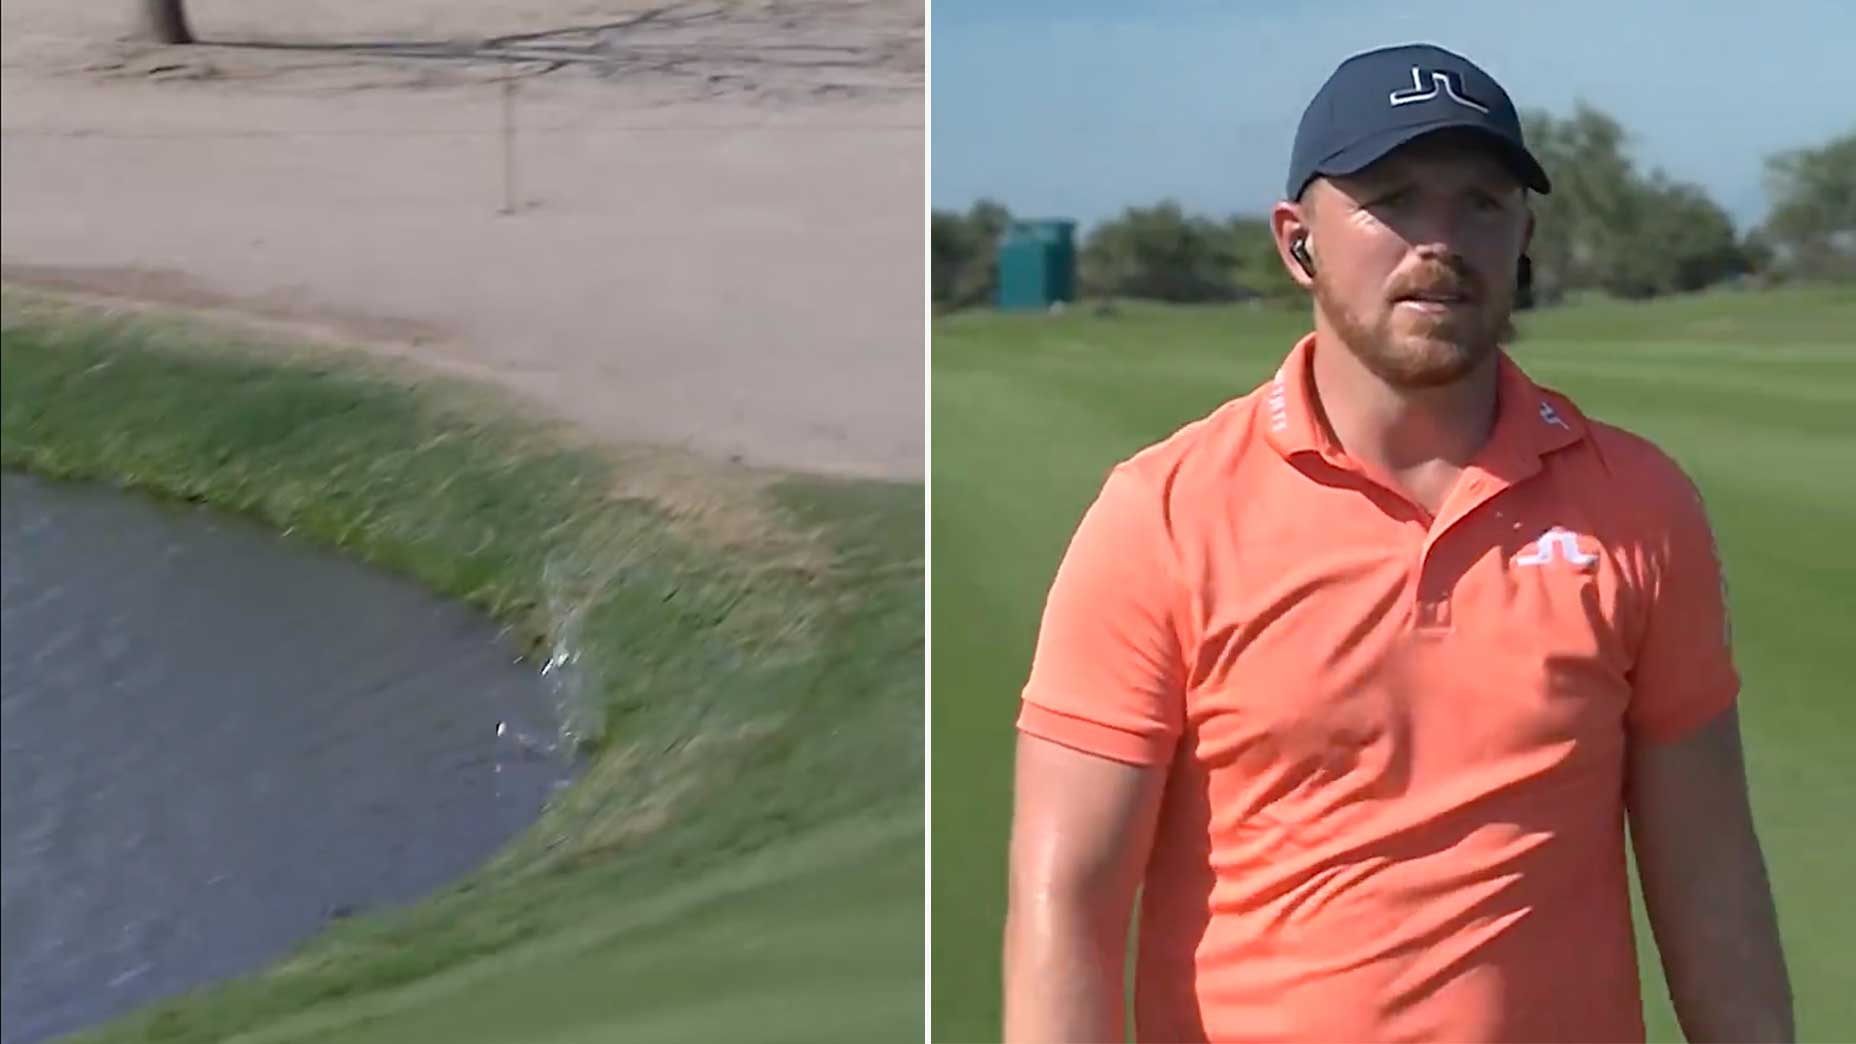 Matt Wallace continued his interview despite knocking his second shot in the water.